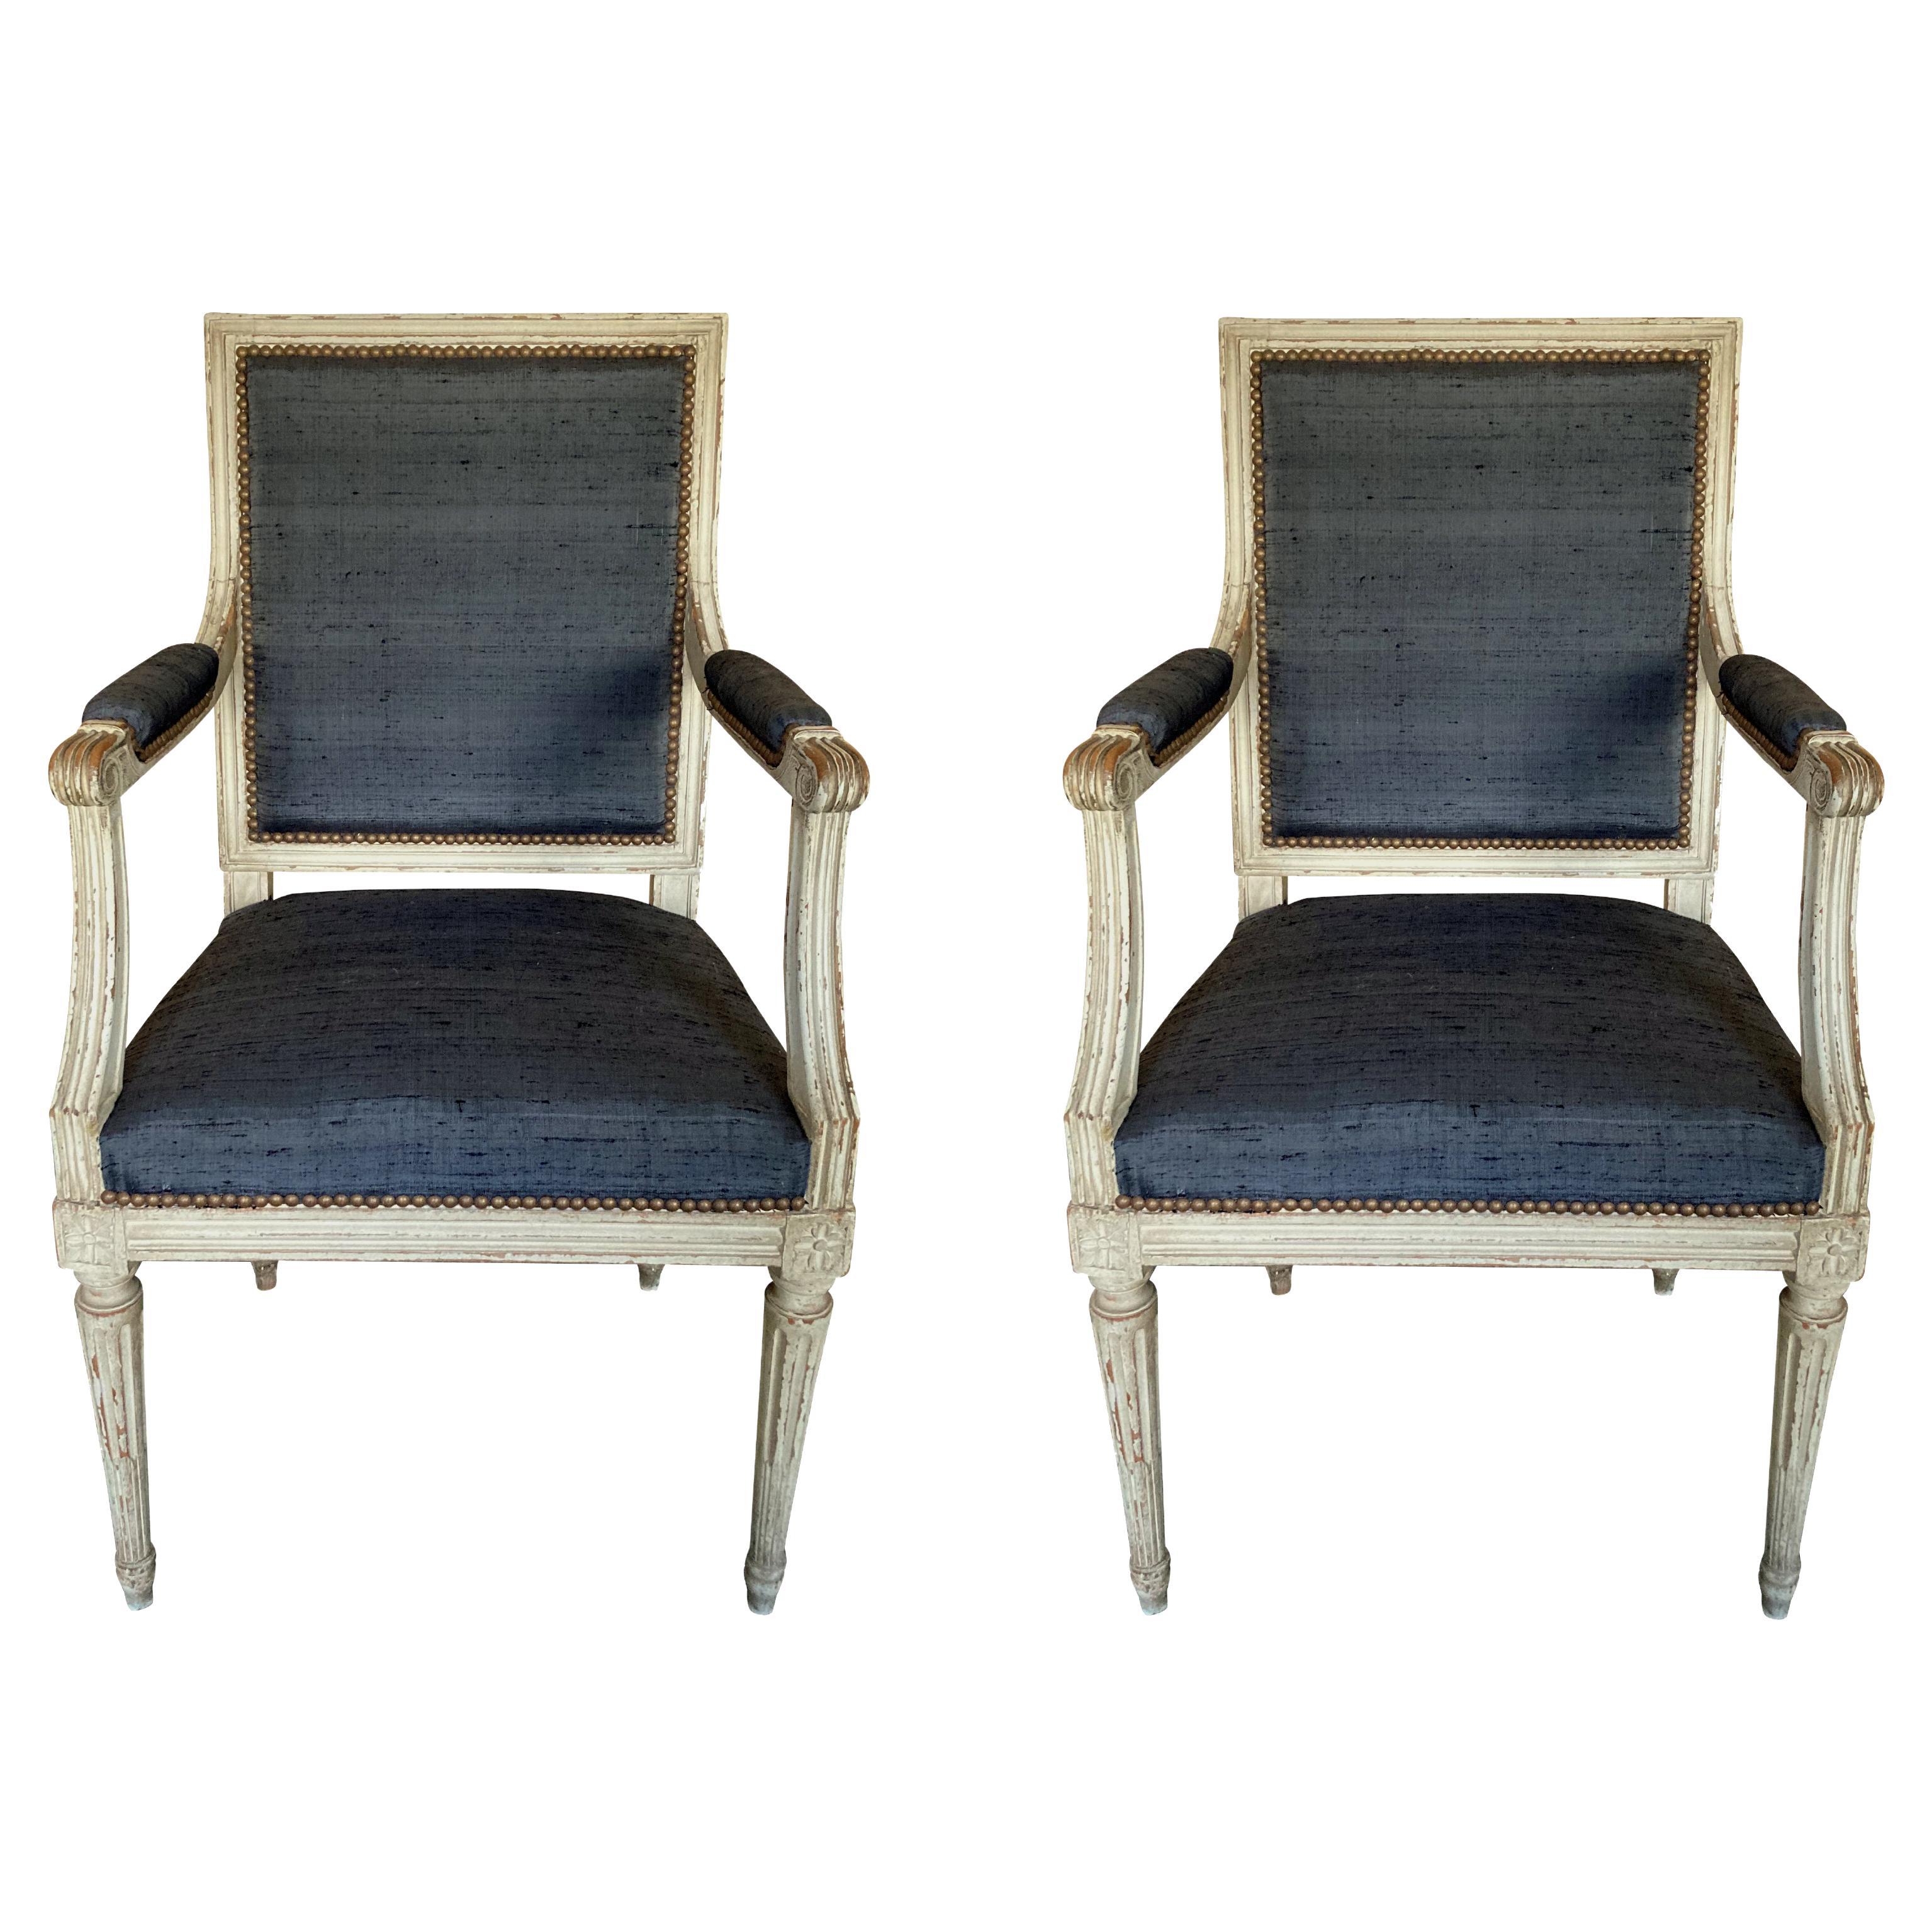 Pair of Painted Louis XVI Style Armchairs in Charcoal Silk